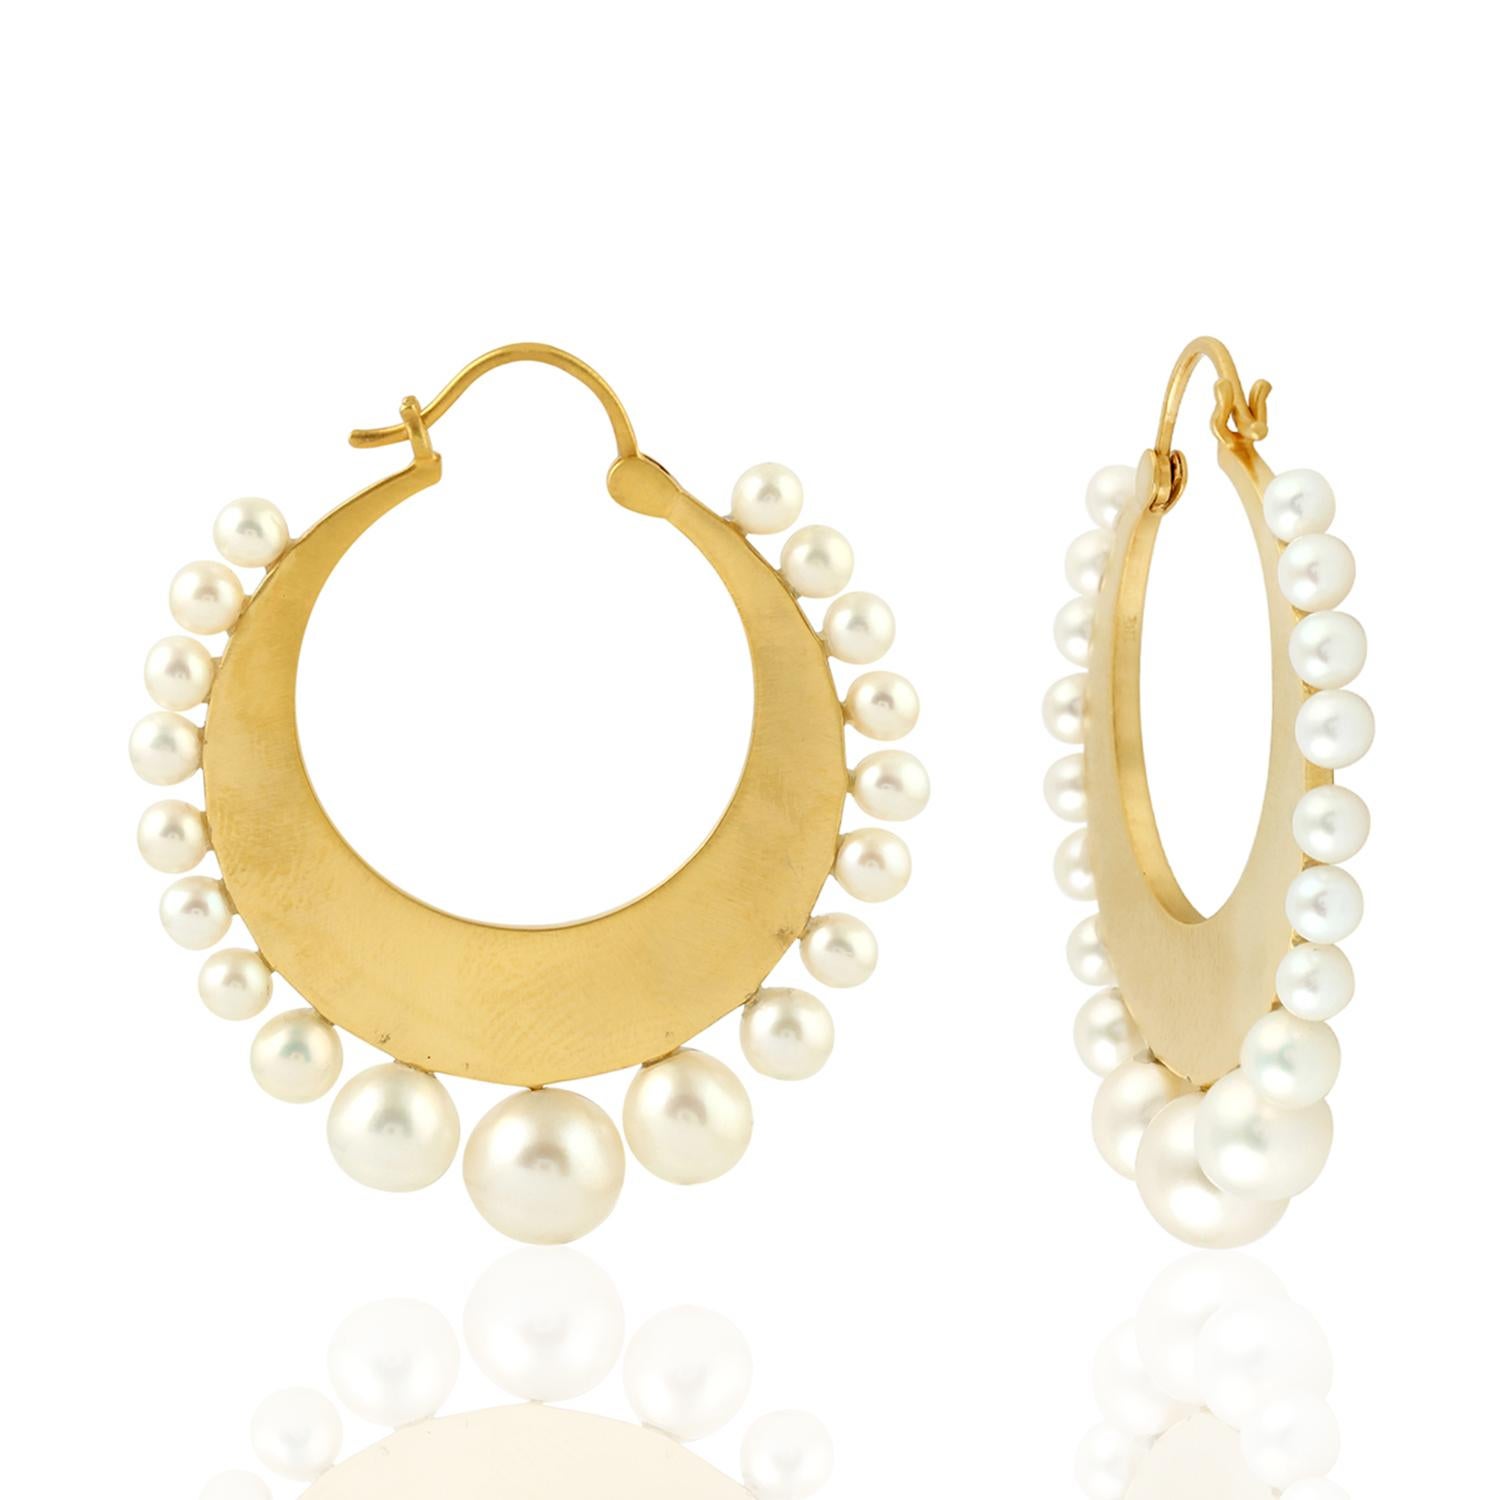 Handcrafted from 18K Gold, these beautiful hoop earrings are set with 32.02 carats of pearl.

FOLLOW  MEGHNA JEWELS storefront to view the latest collection & exclusive pieces.  Meghna Jewels is proudly rated as a Top Seller on 1stdibs with 5 star